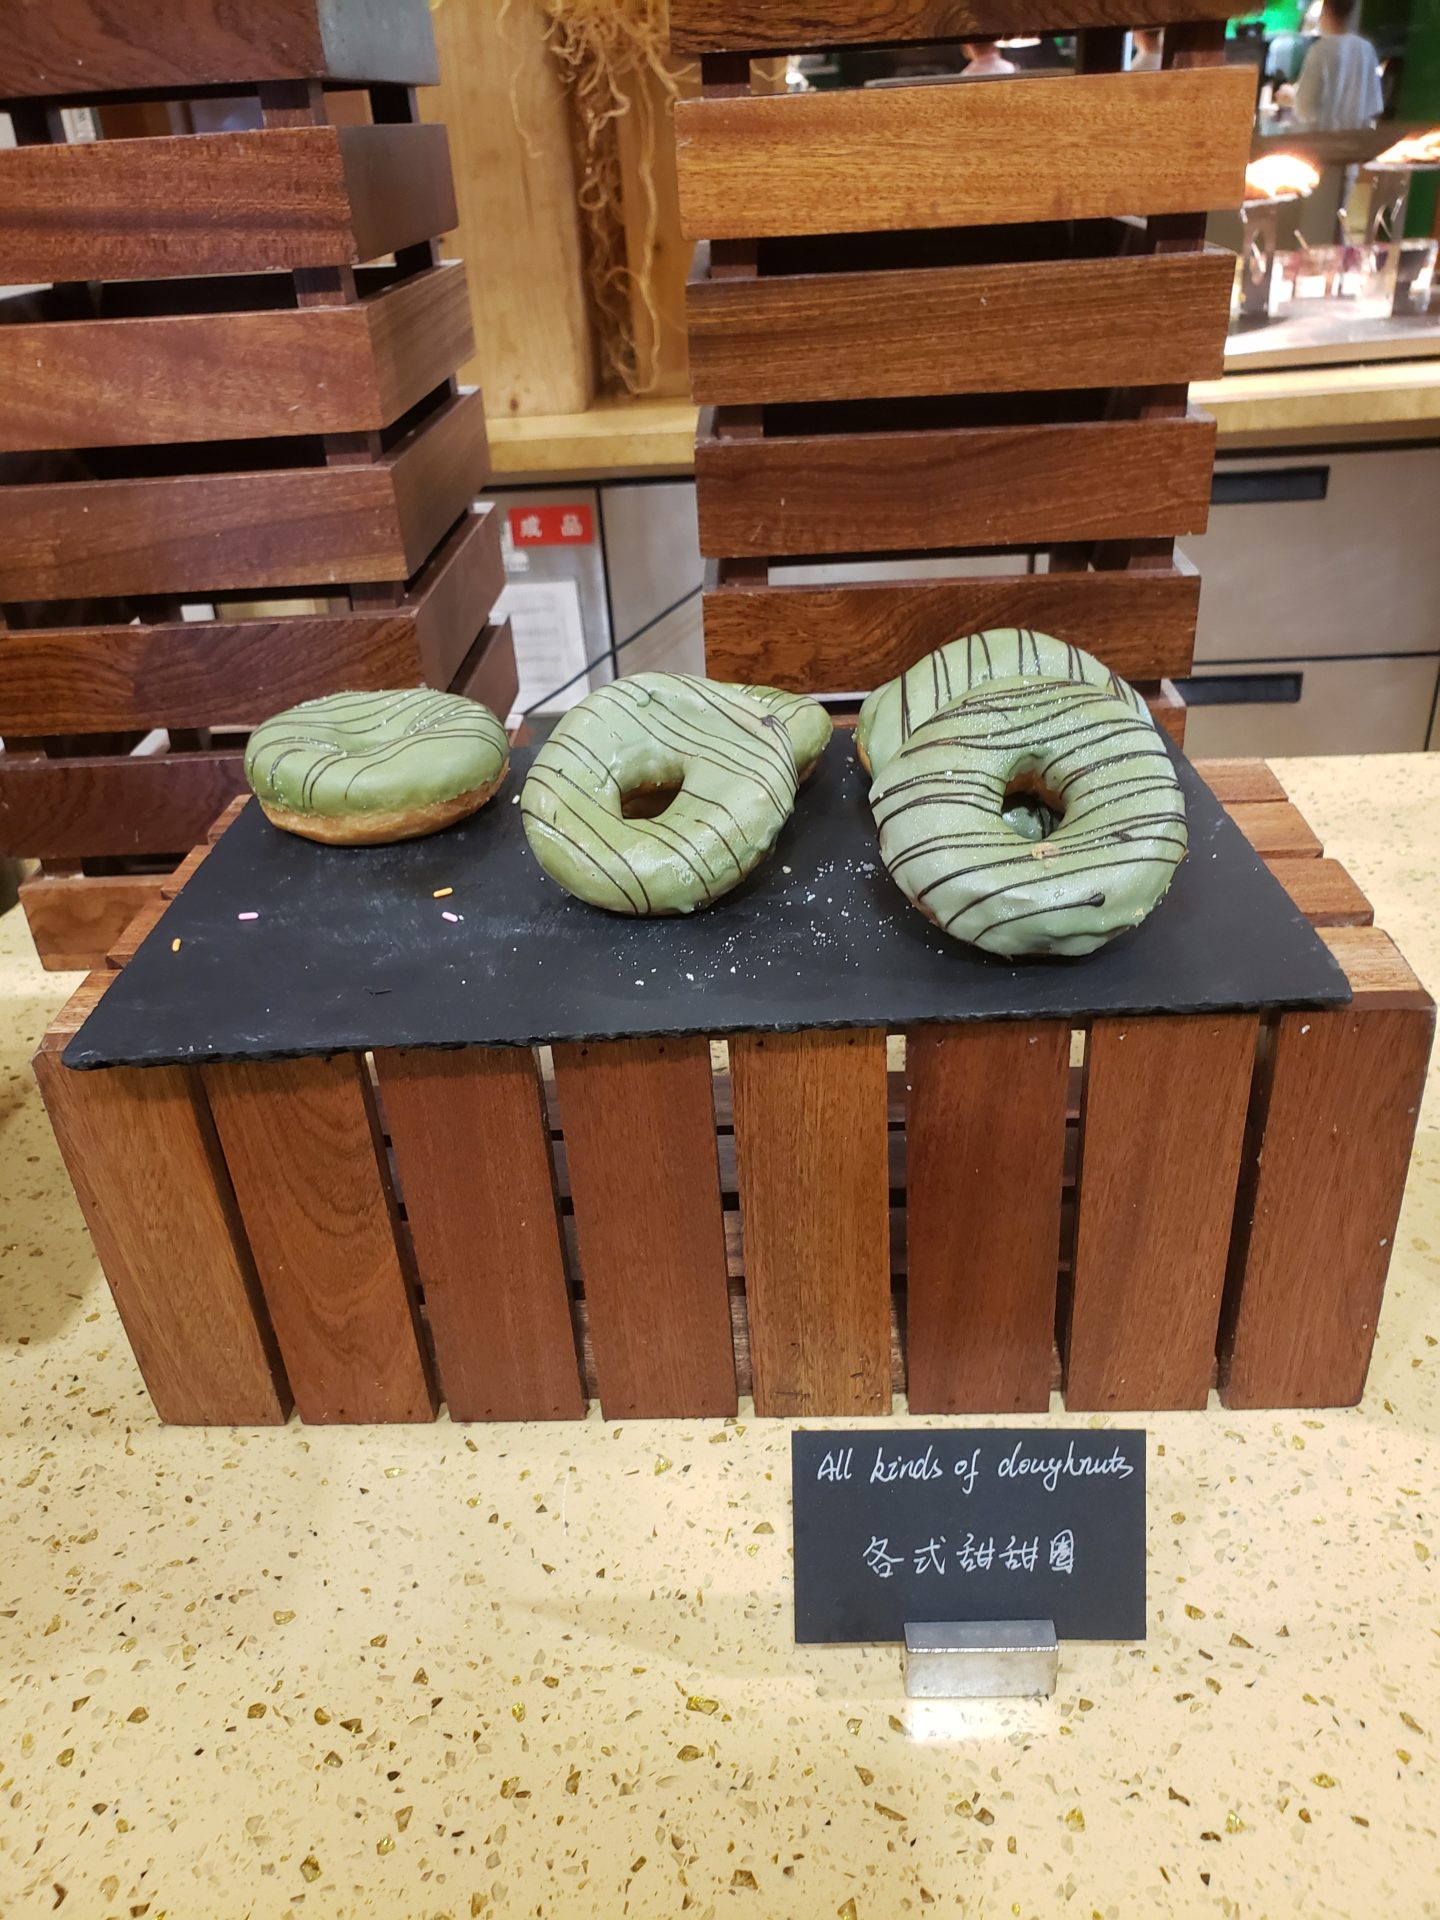 a group of donuts on a wooden box